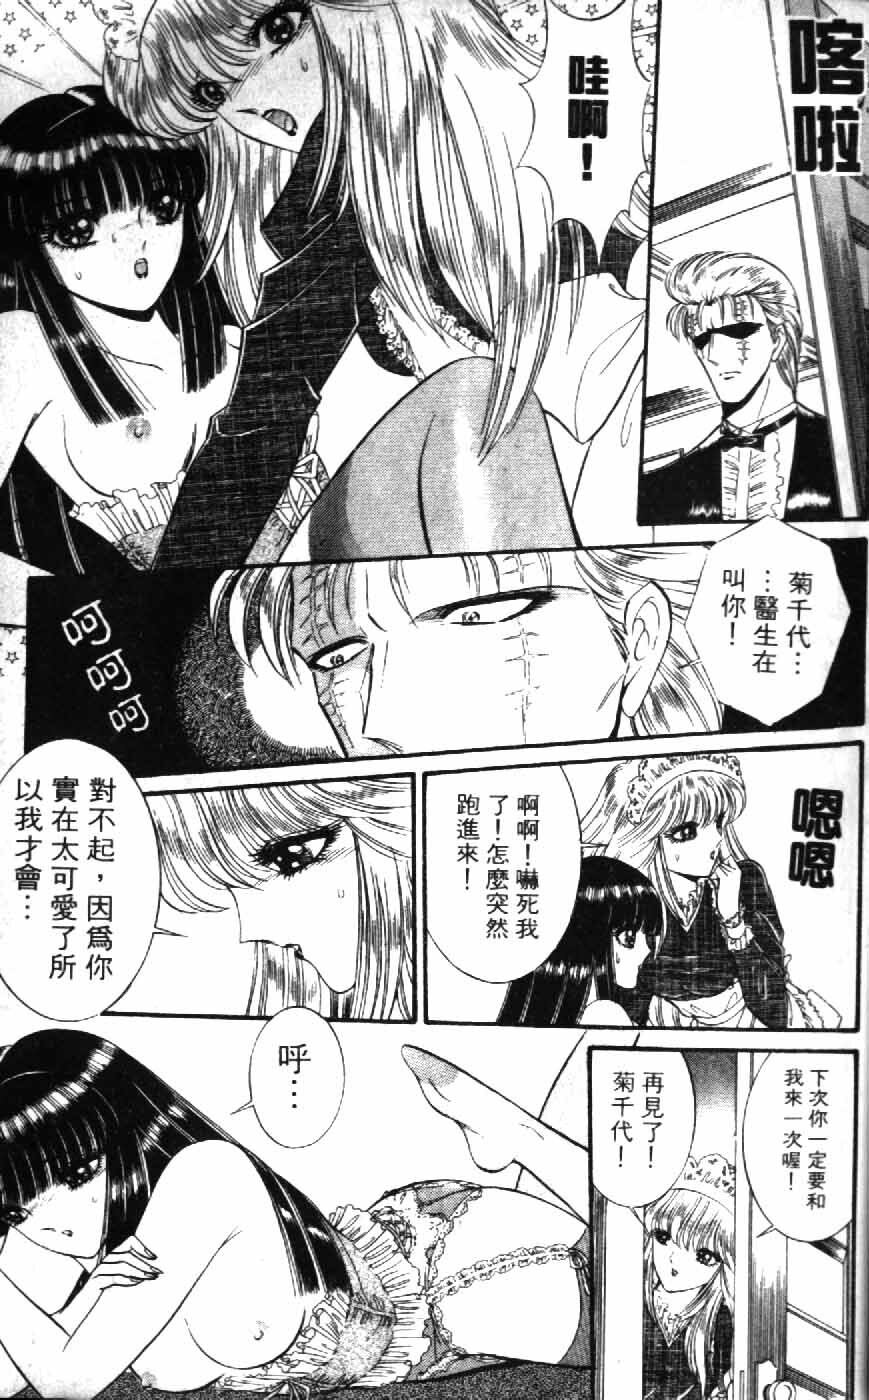 [Senno Knife] Ouma ga Horror Show 1 - Trans Sexual Special Show 1 | 顫慄博覽會 1 [Chinese] page 27 full